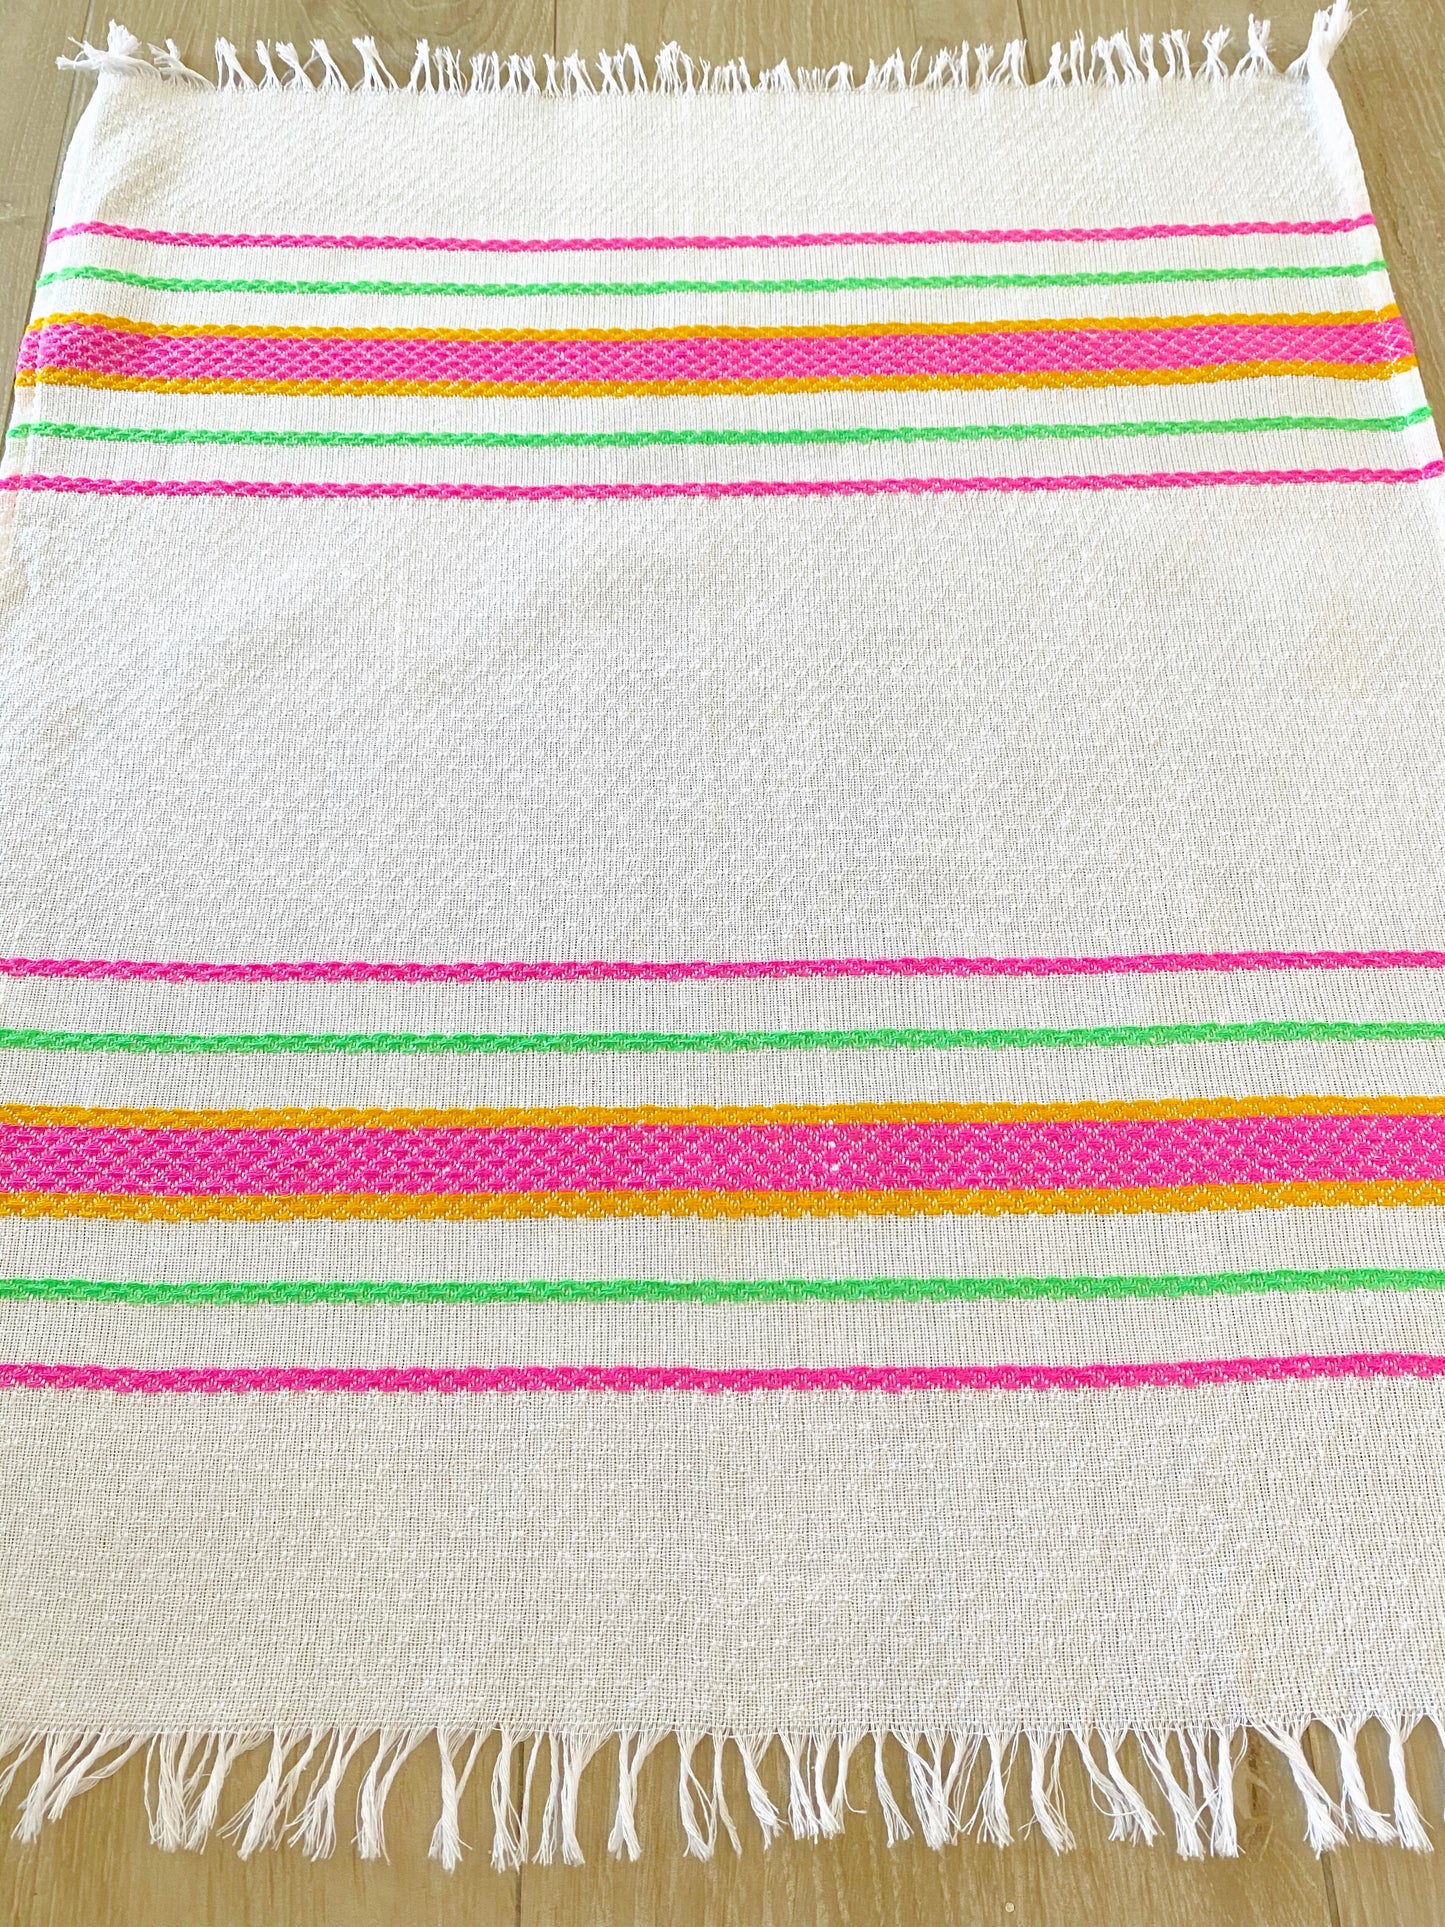 Dish towels- pink accent